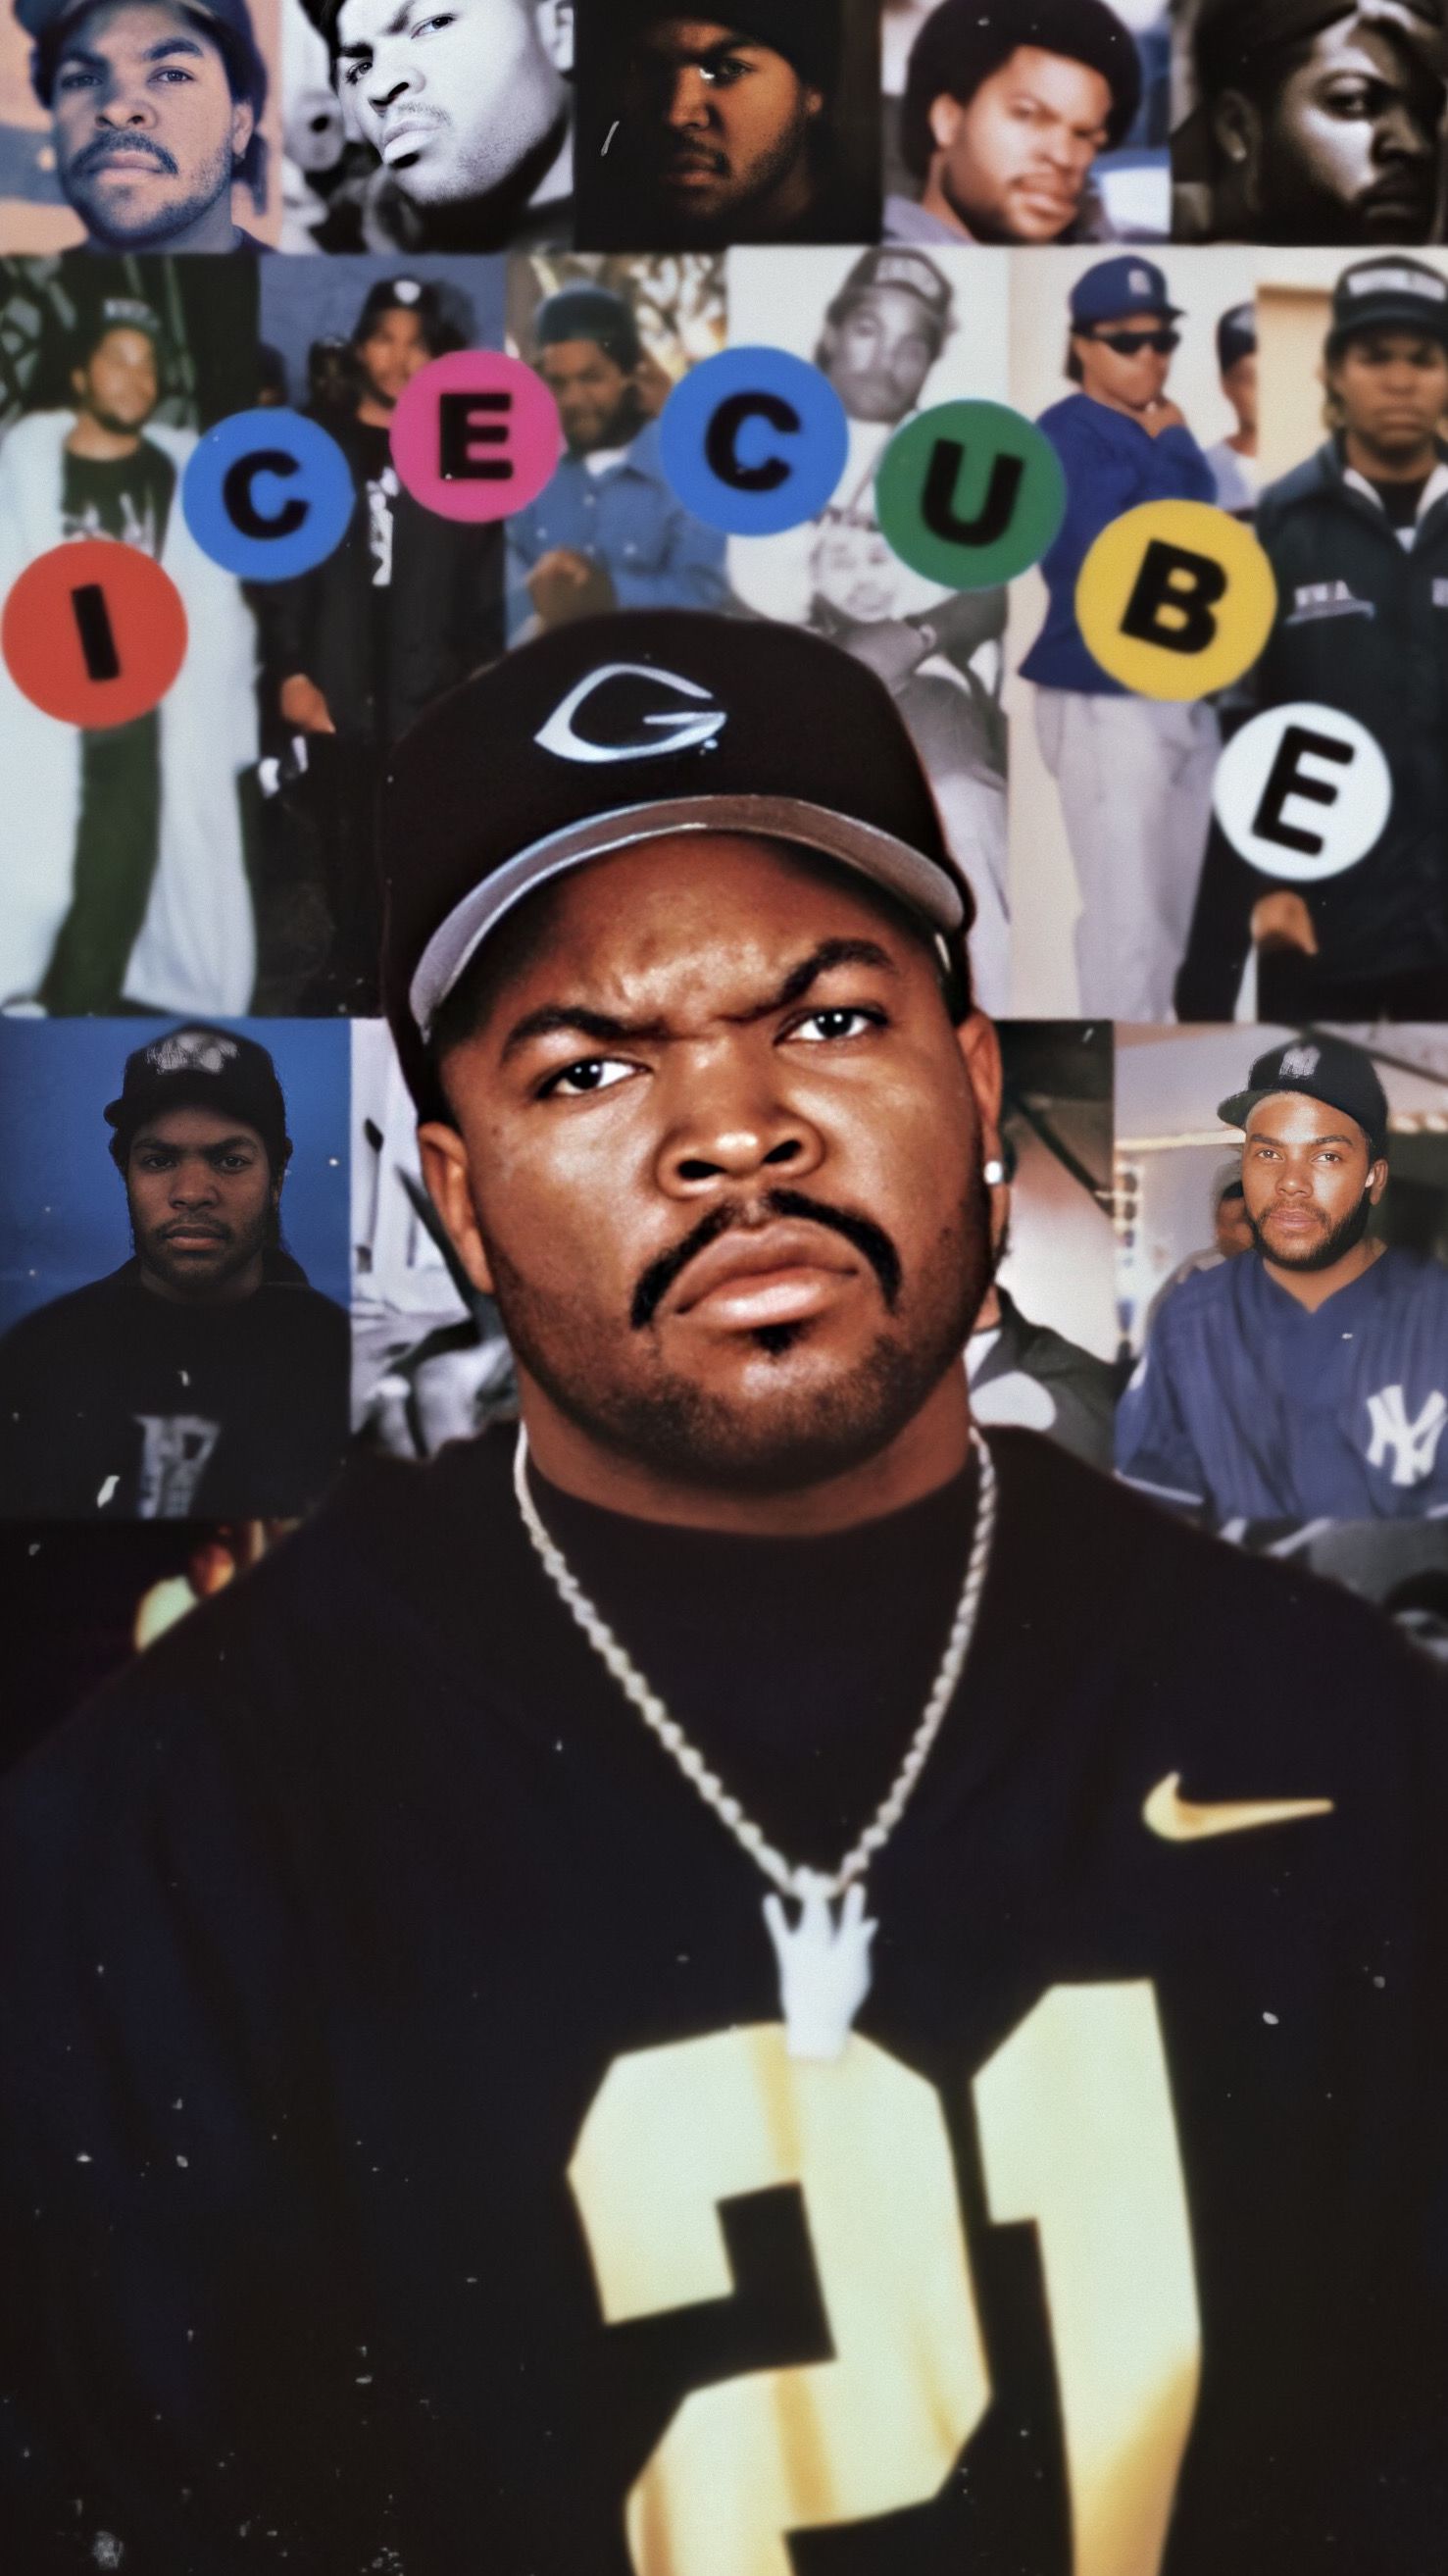 Ice Cube Rapper Wallpapers